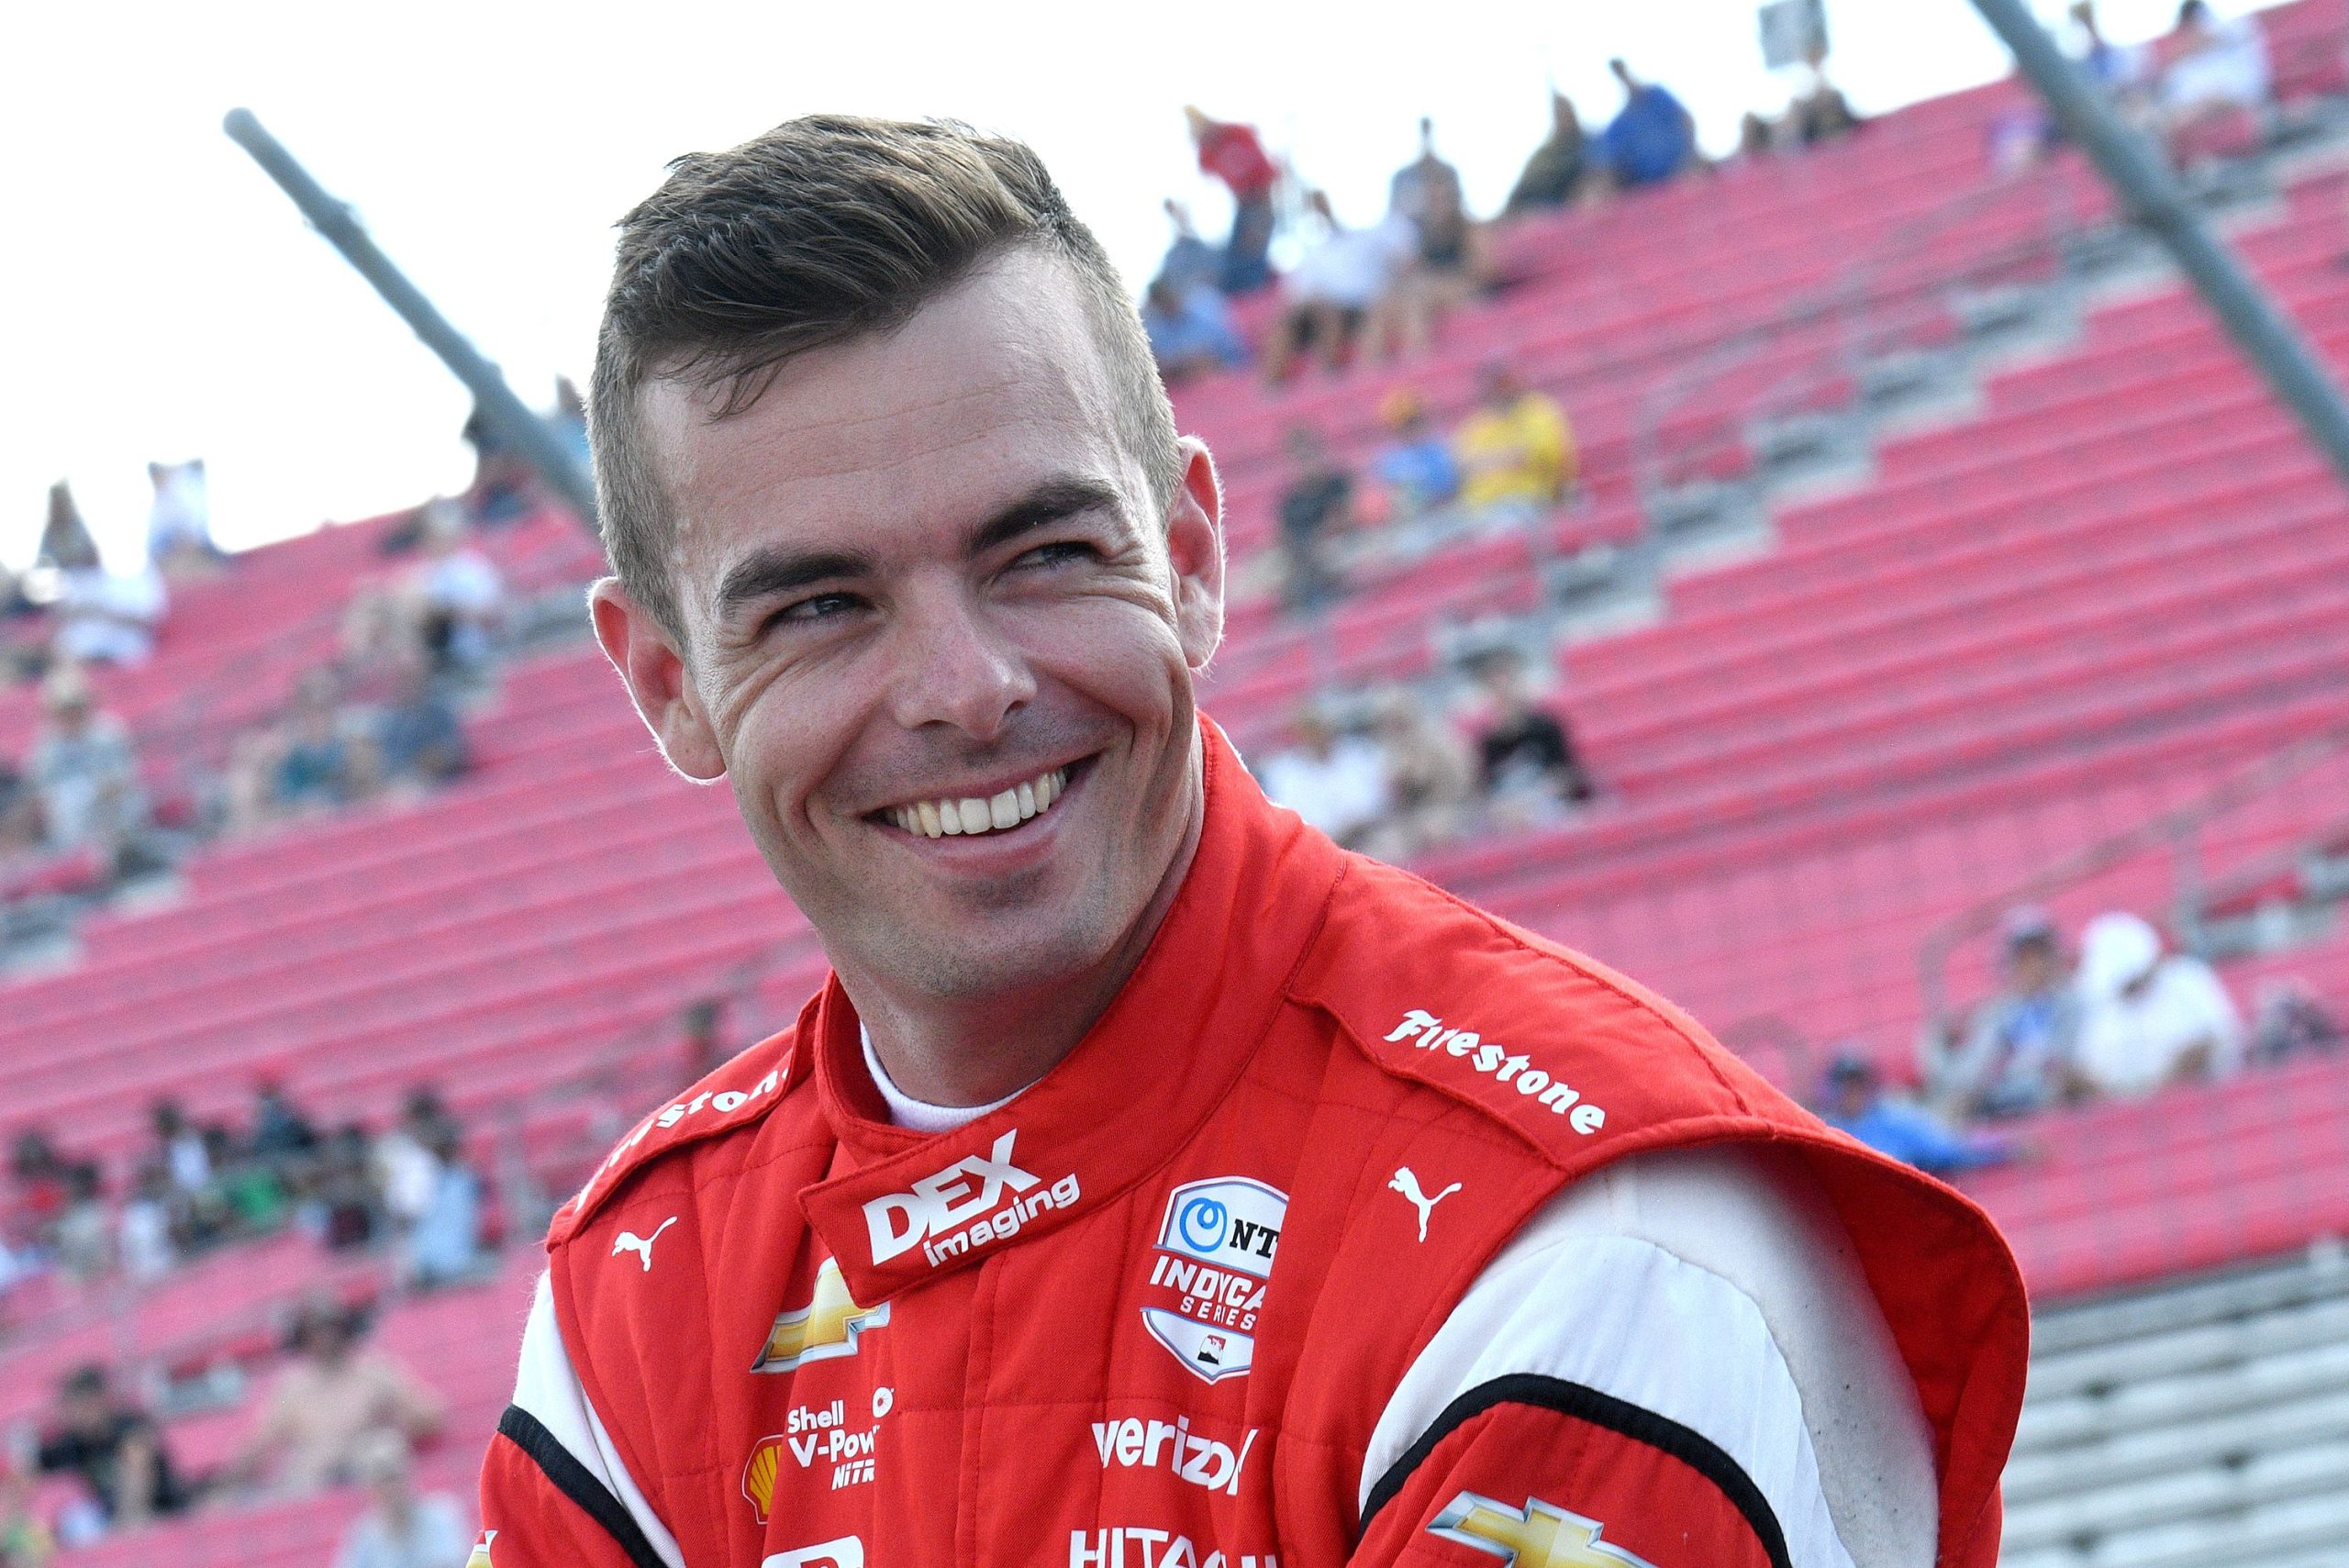 Indy 500 Prep: McLaughlin Shines on Practice Day at Speedway